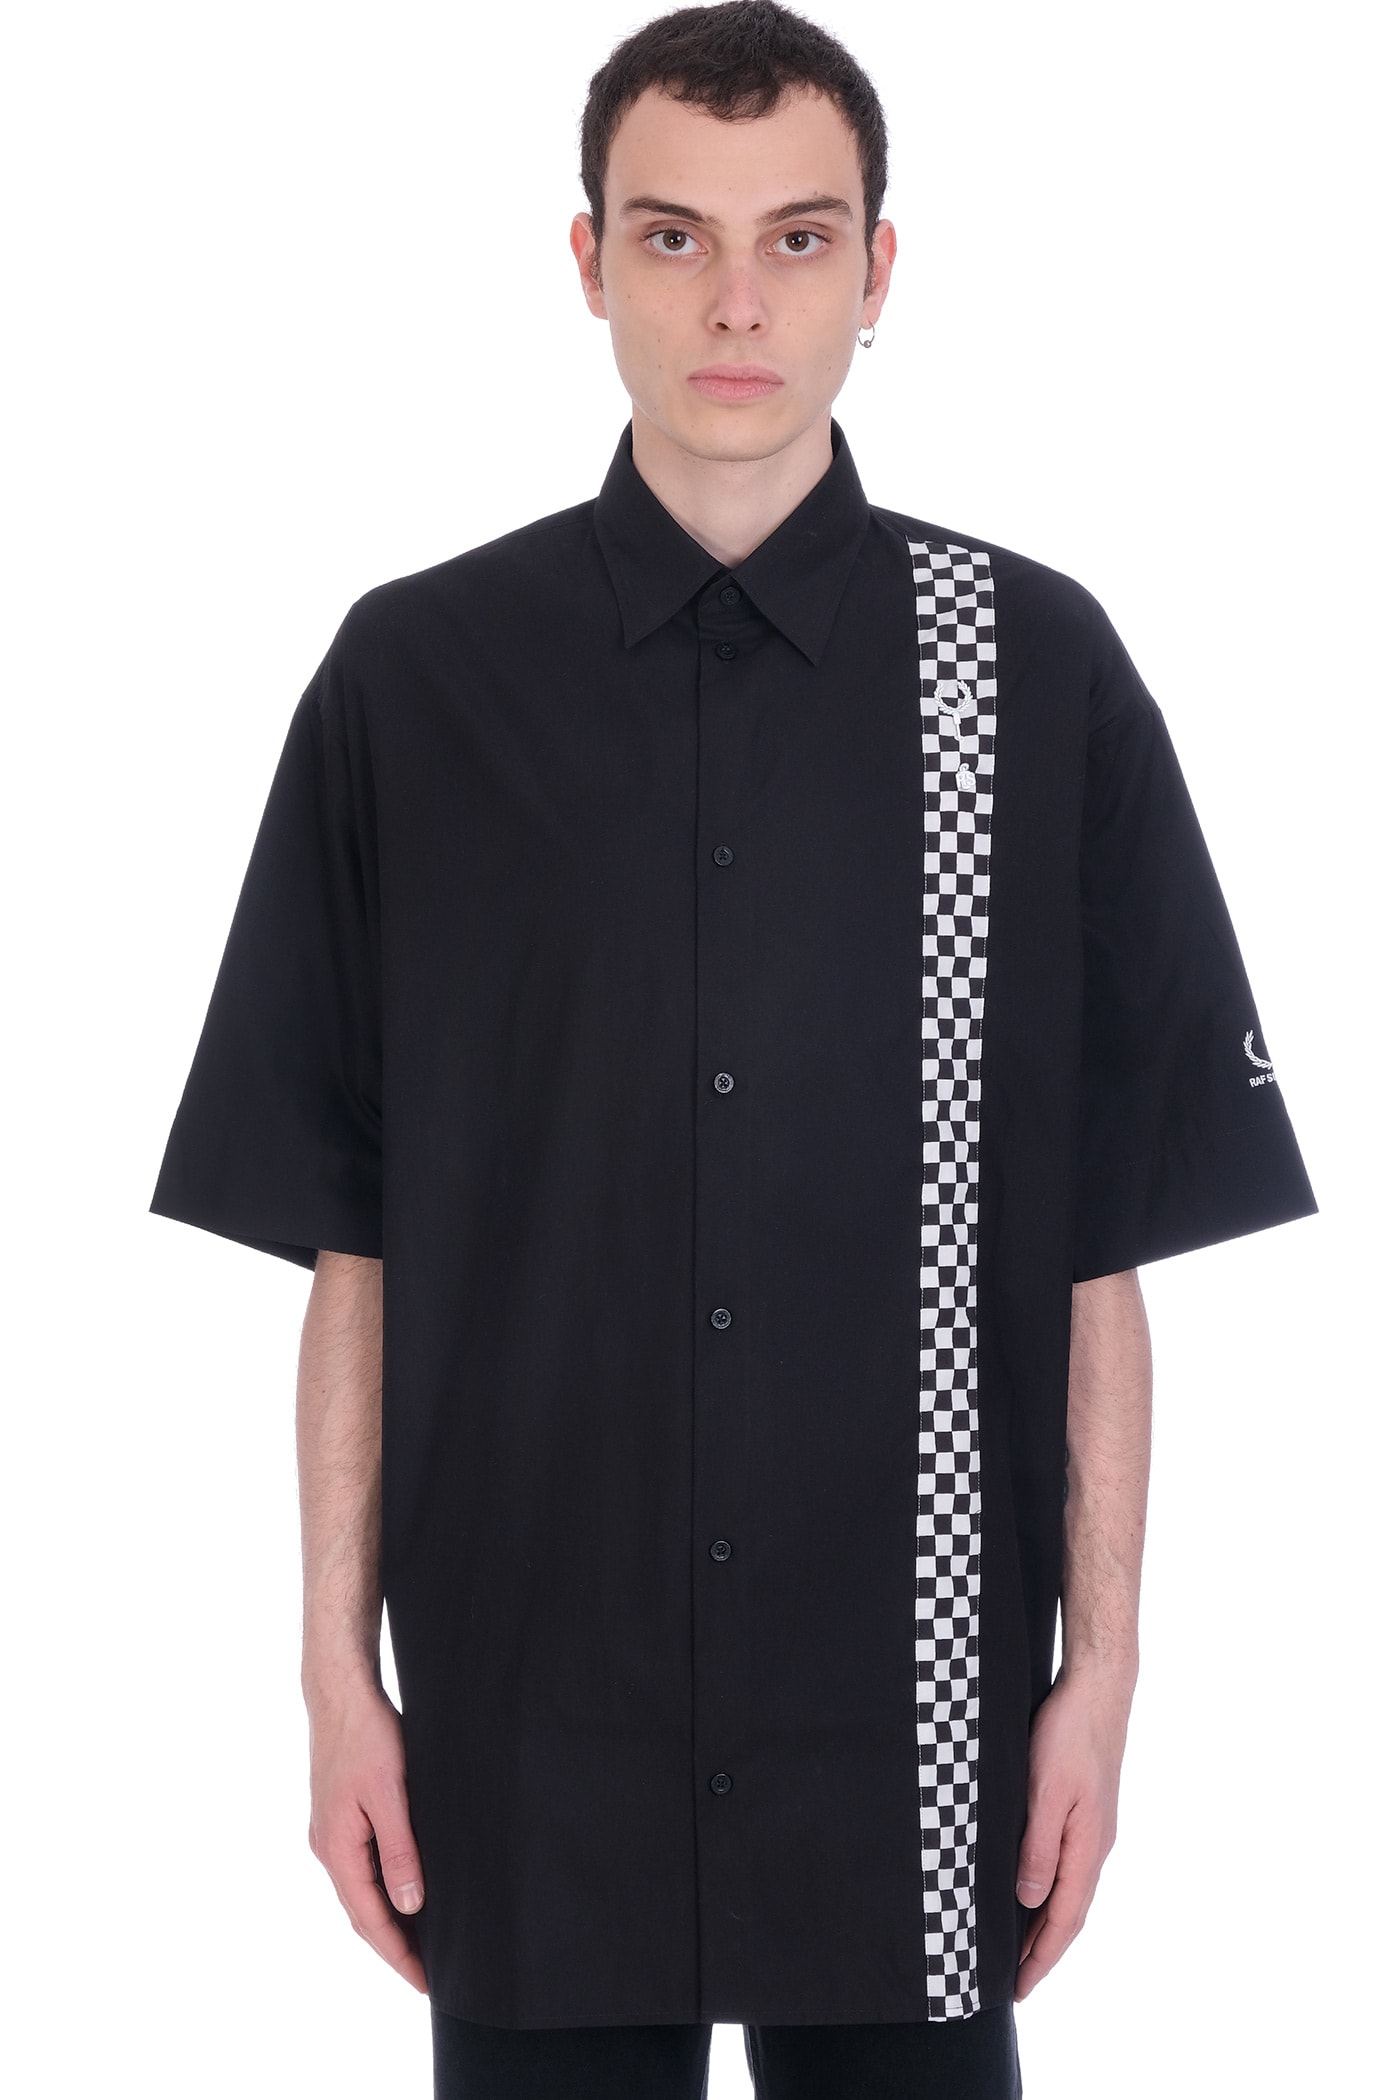 Fred Perry by Raf Simons Shirt In Black Cotton